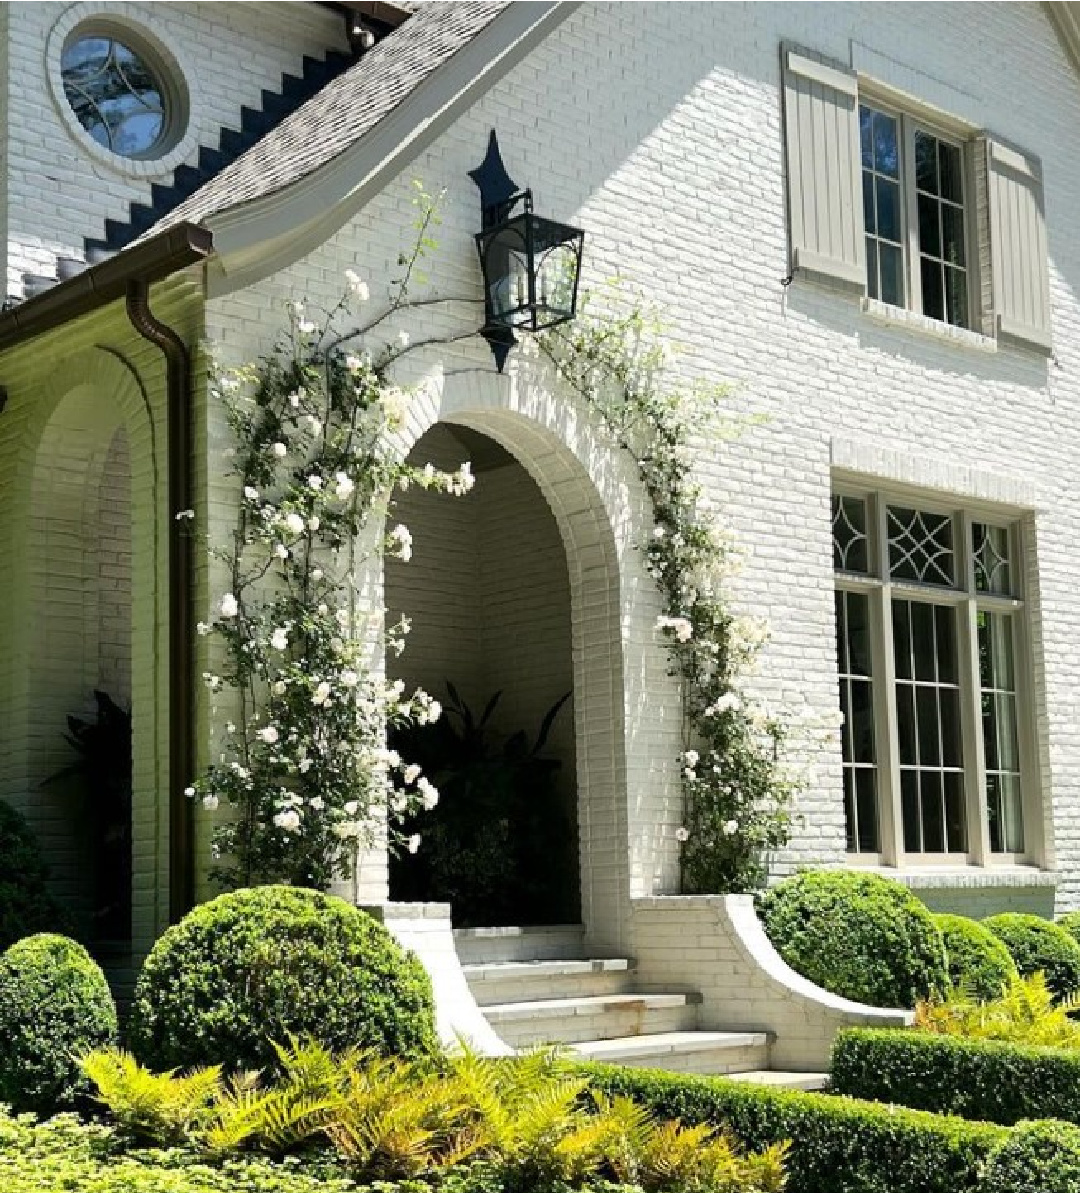 BM Balboa Mist 1549 on a brick exterior of a breathtaking storybook charm of a Tudor style white painted brick home renovated by @ladisicfinehomes with arched entrance softened by creeping roses - photo by Sherry Hart. #balboamist #bmbalboamist